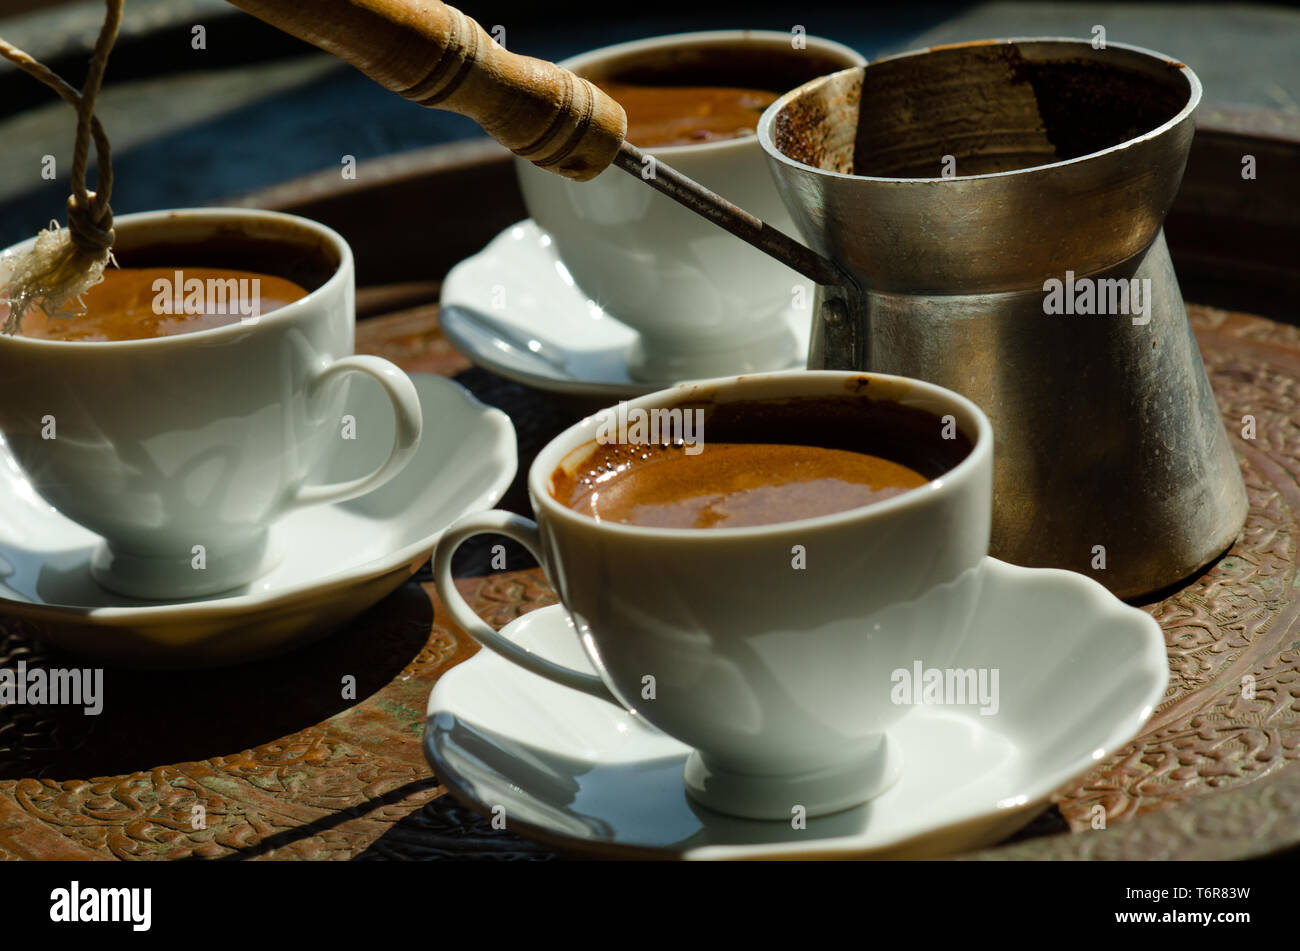 Traditional tray of Arabic or Turkish style coffee Stock Photo